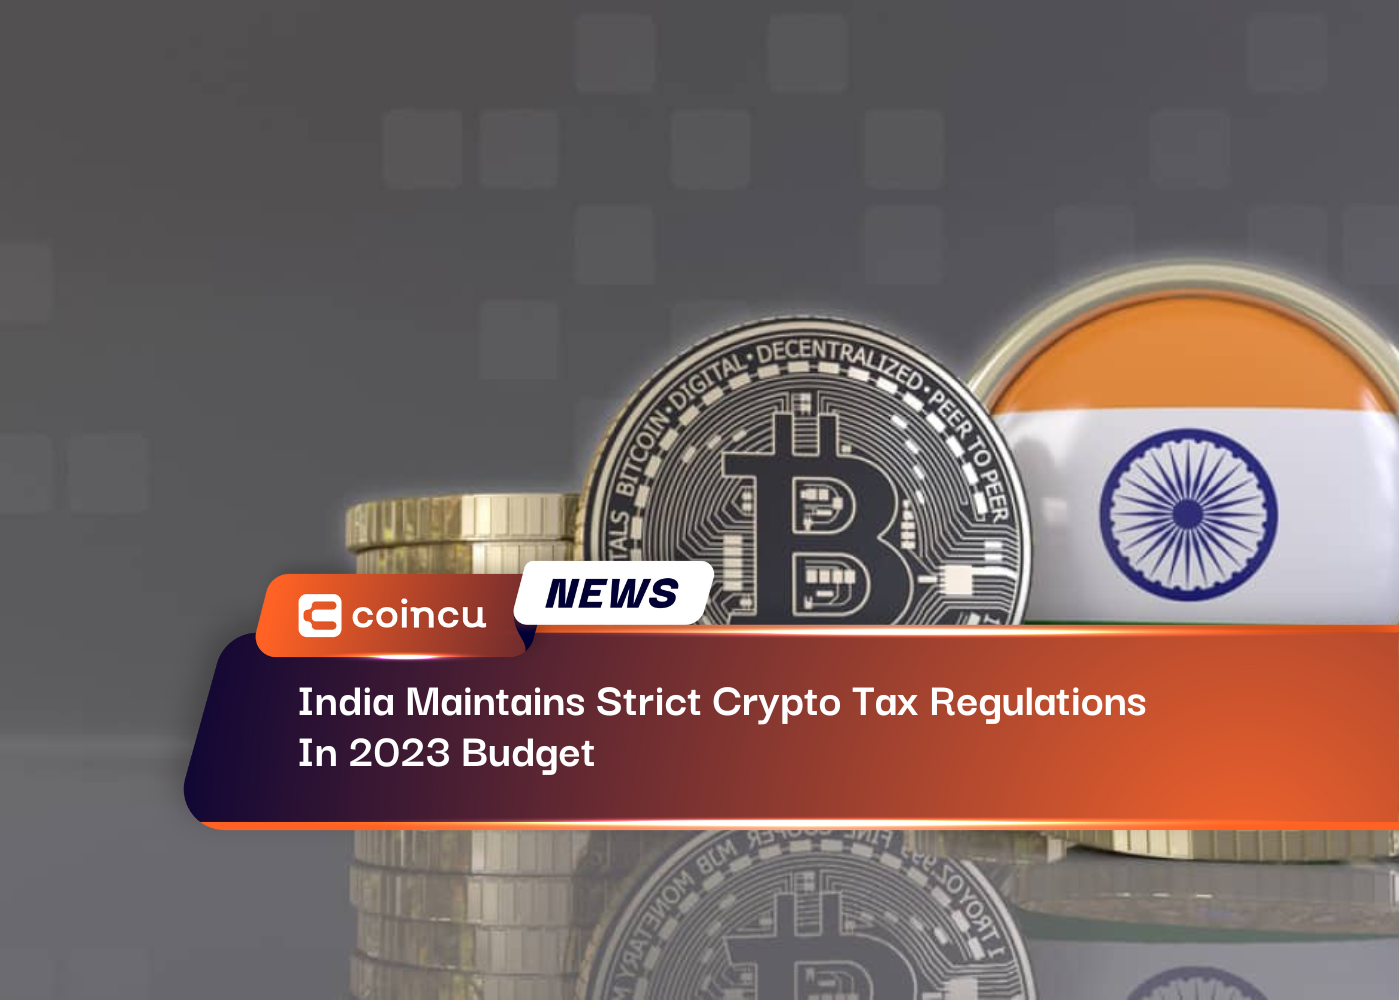 India Maintains Strict Crypto Tax Regulations